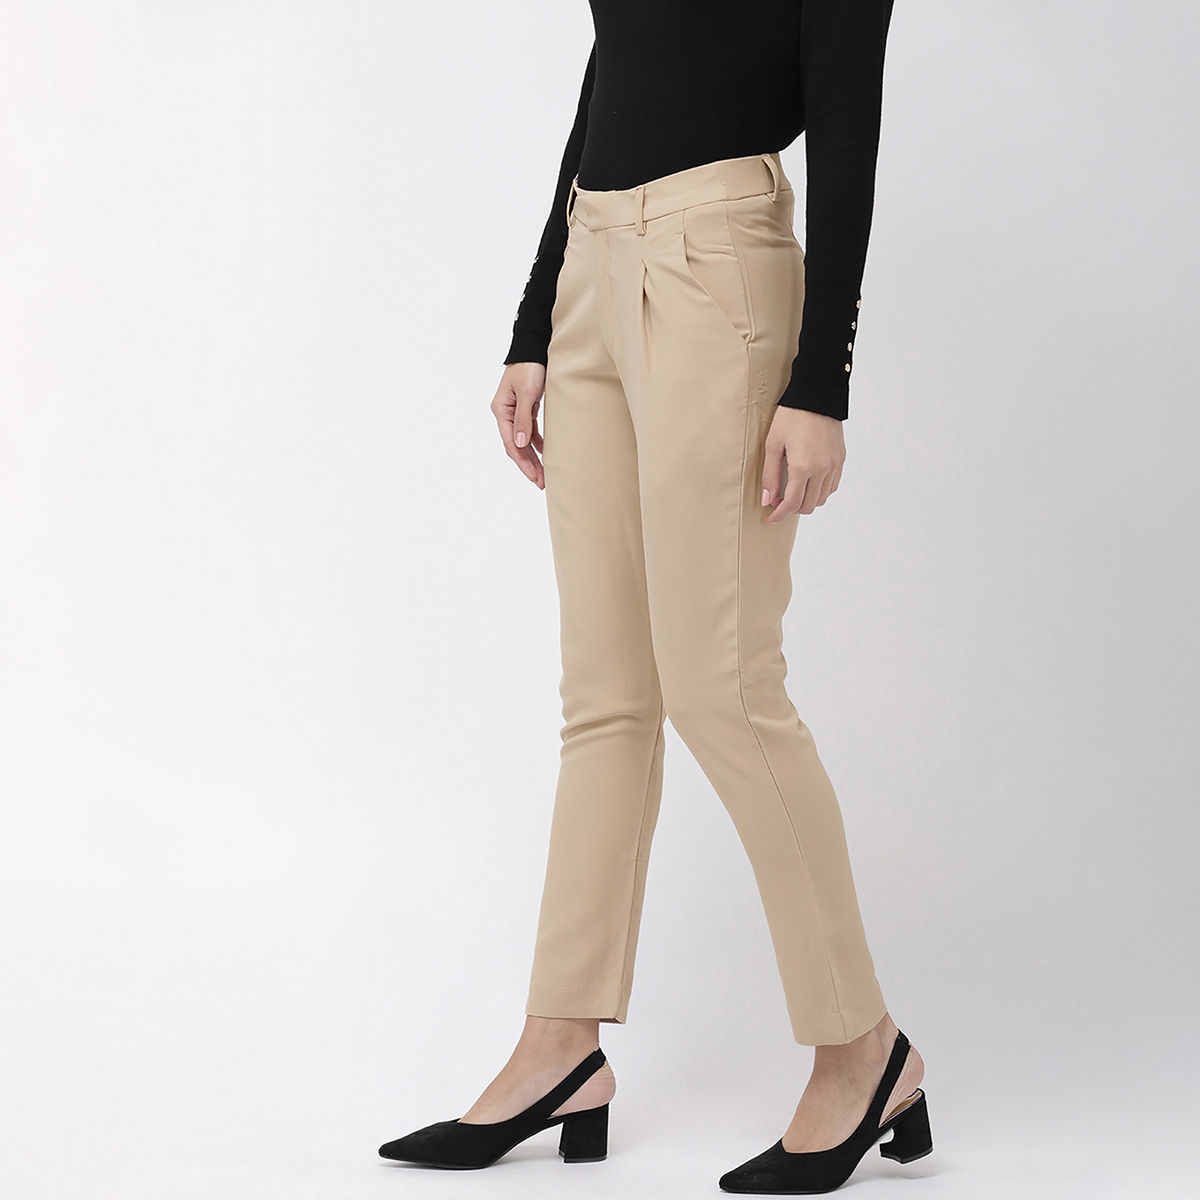 Buy Go Colors Formal Trousers Online At Best Price Offers In India